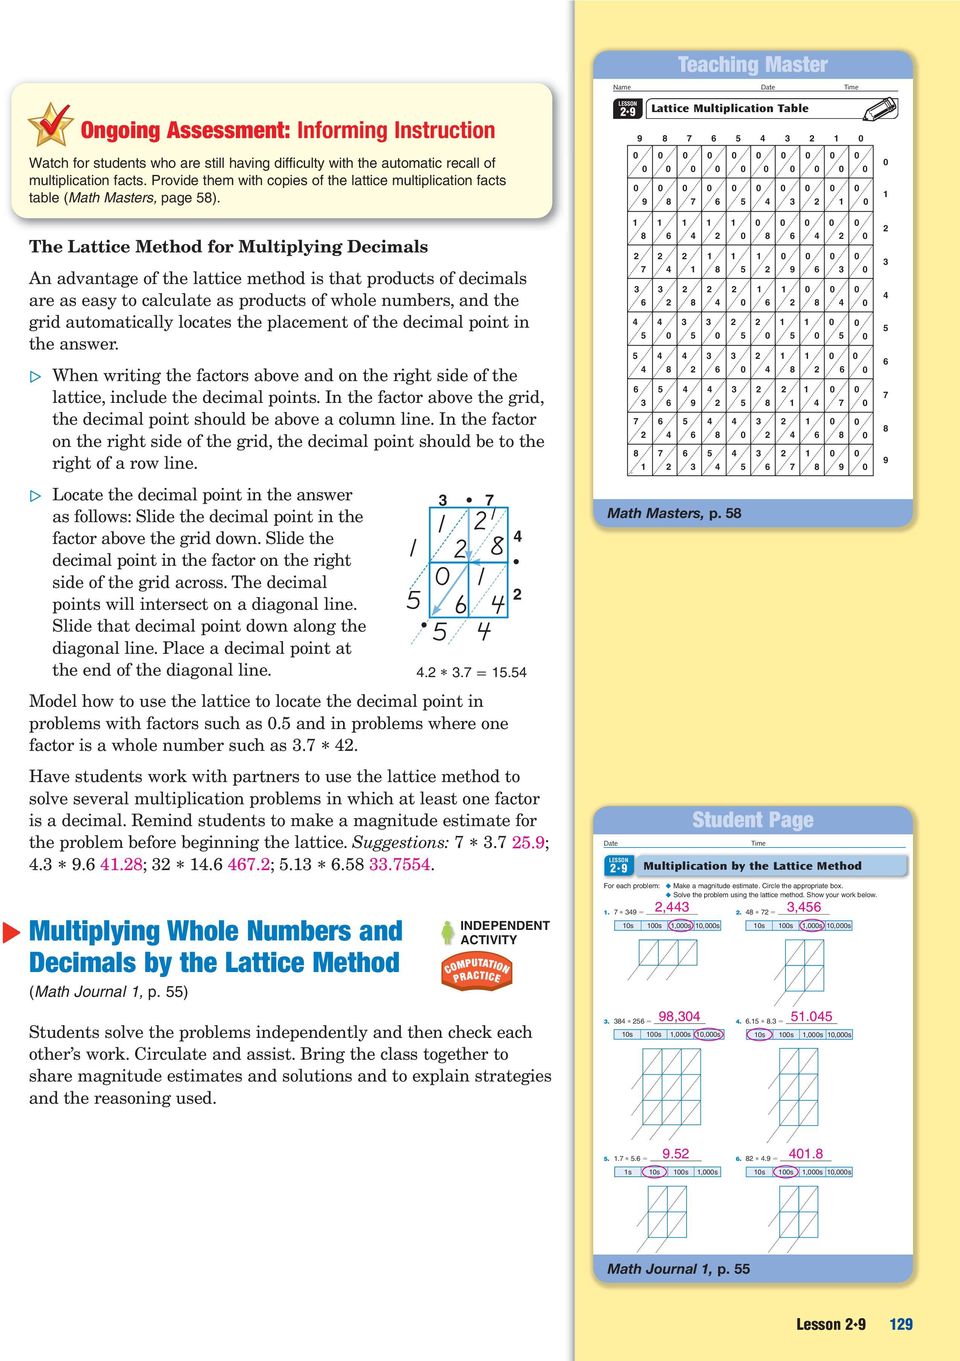 Name 9 Lattice Multiplication Table 9 7 9 Teaching Master 7 The Lattice Method for Multiplying Decimals An advantage of the lattice method is that products of decimals are as easy to calculate as